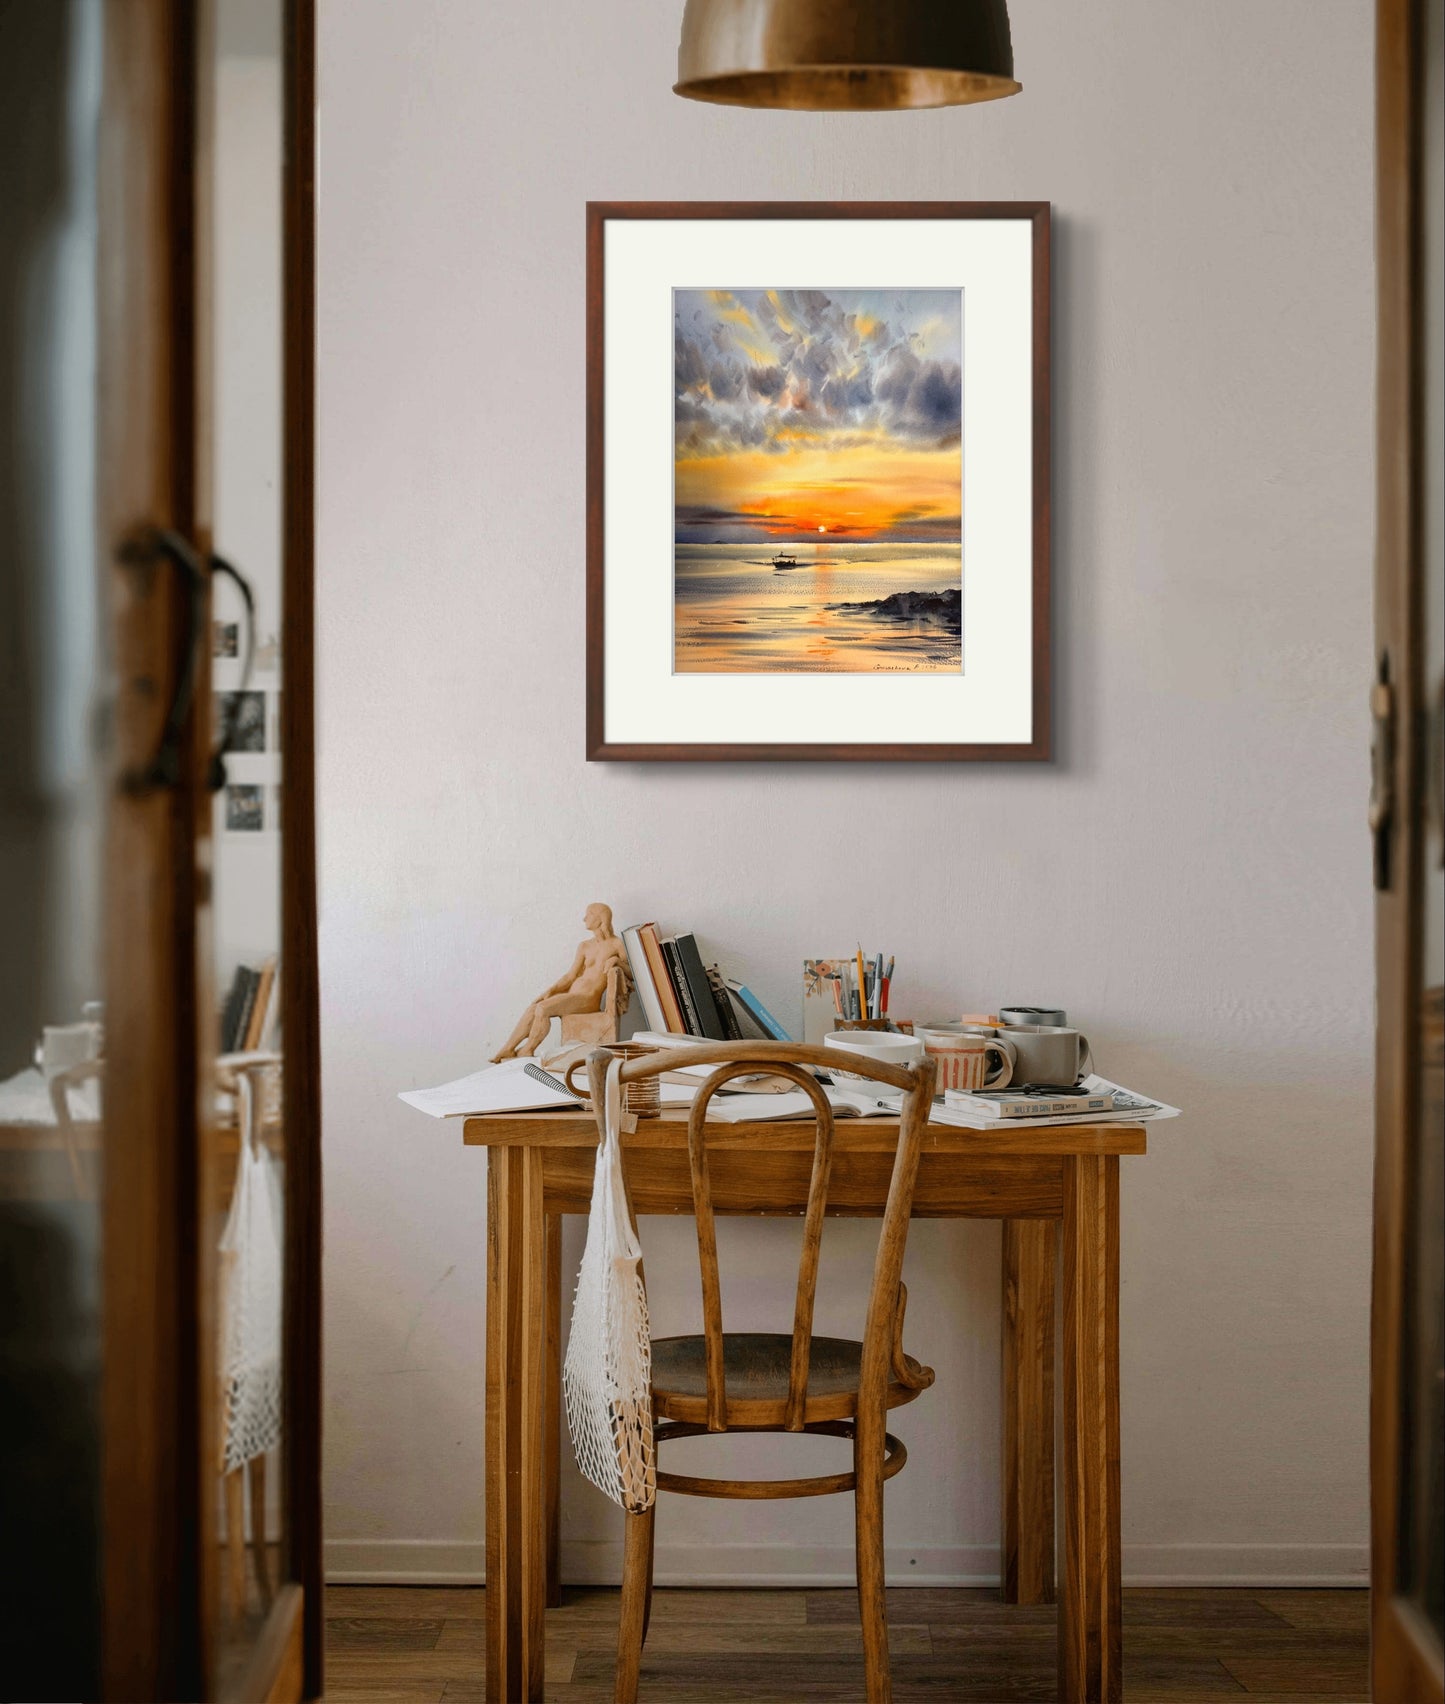 "Orange Sunset #25" Watercolor Painting - Serene Coastal Sunset Artwork, Great for Home Decor or Anniversary Gift